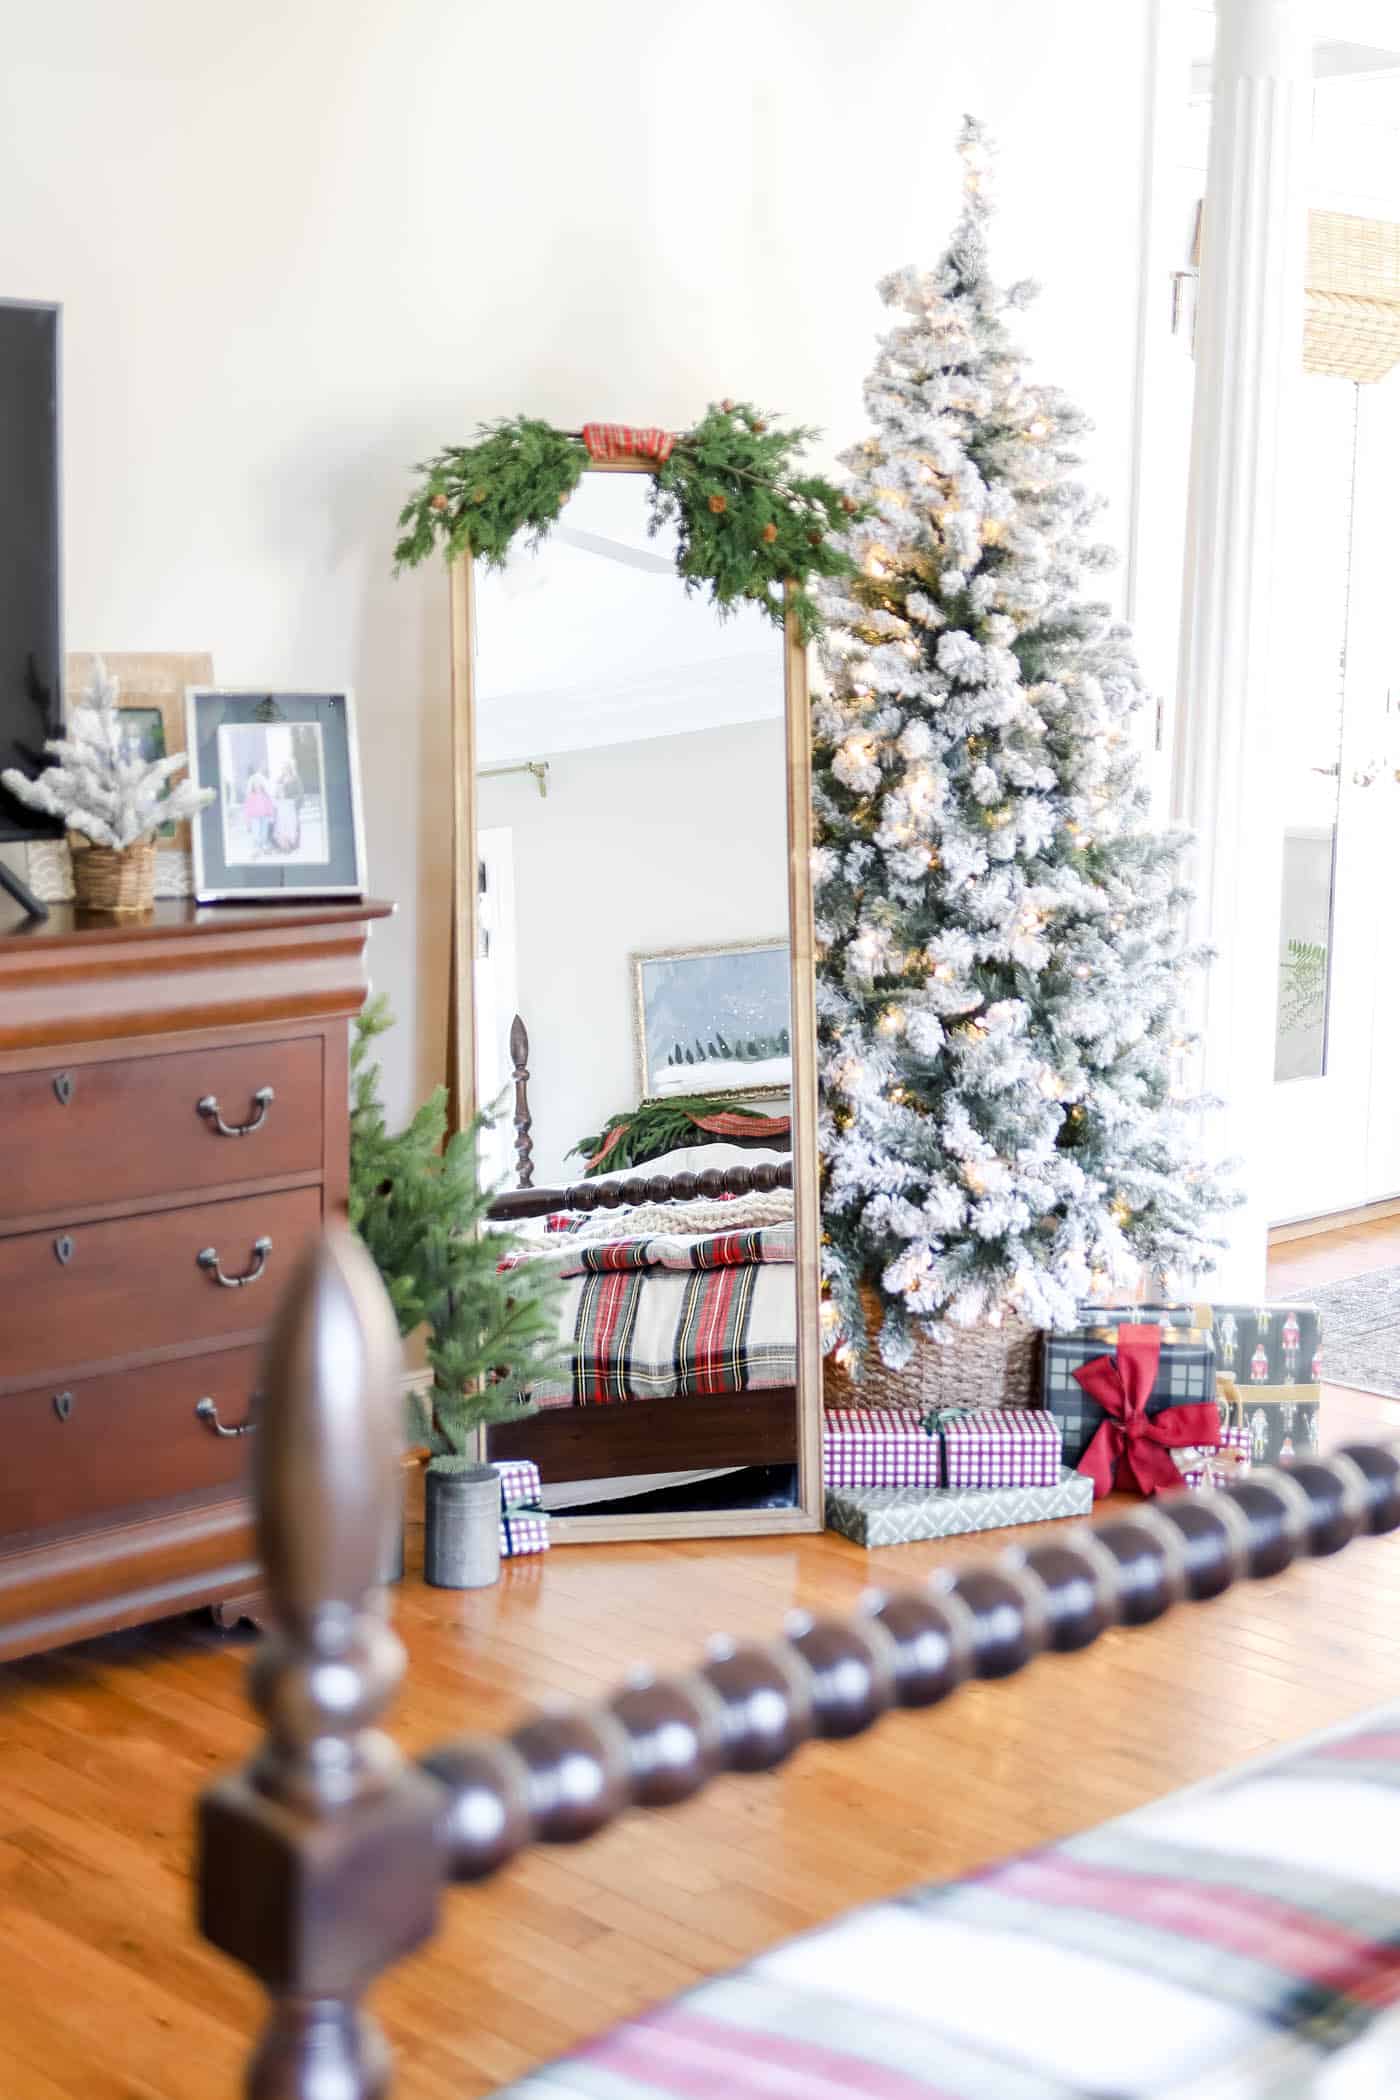 flocked, naked tree in primary bedroom Christmas decor